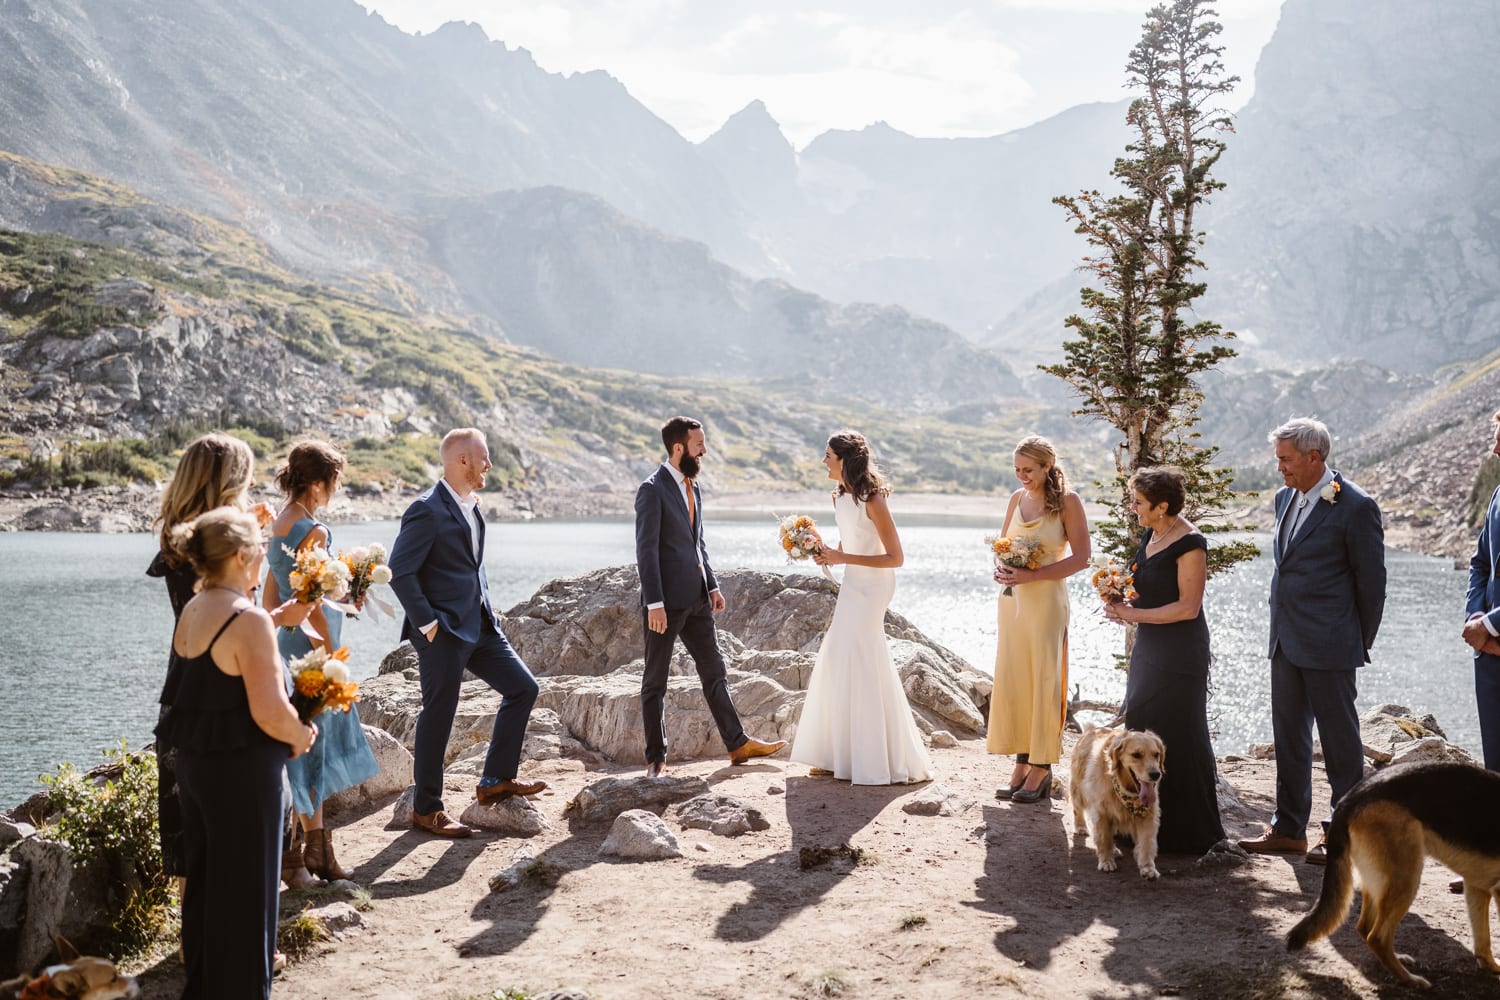 A couple getting married with their families at an alpine lake after their Self-Solemnization elopement